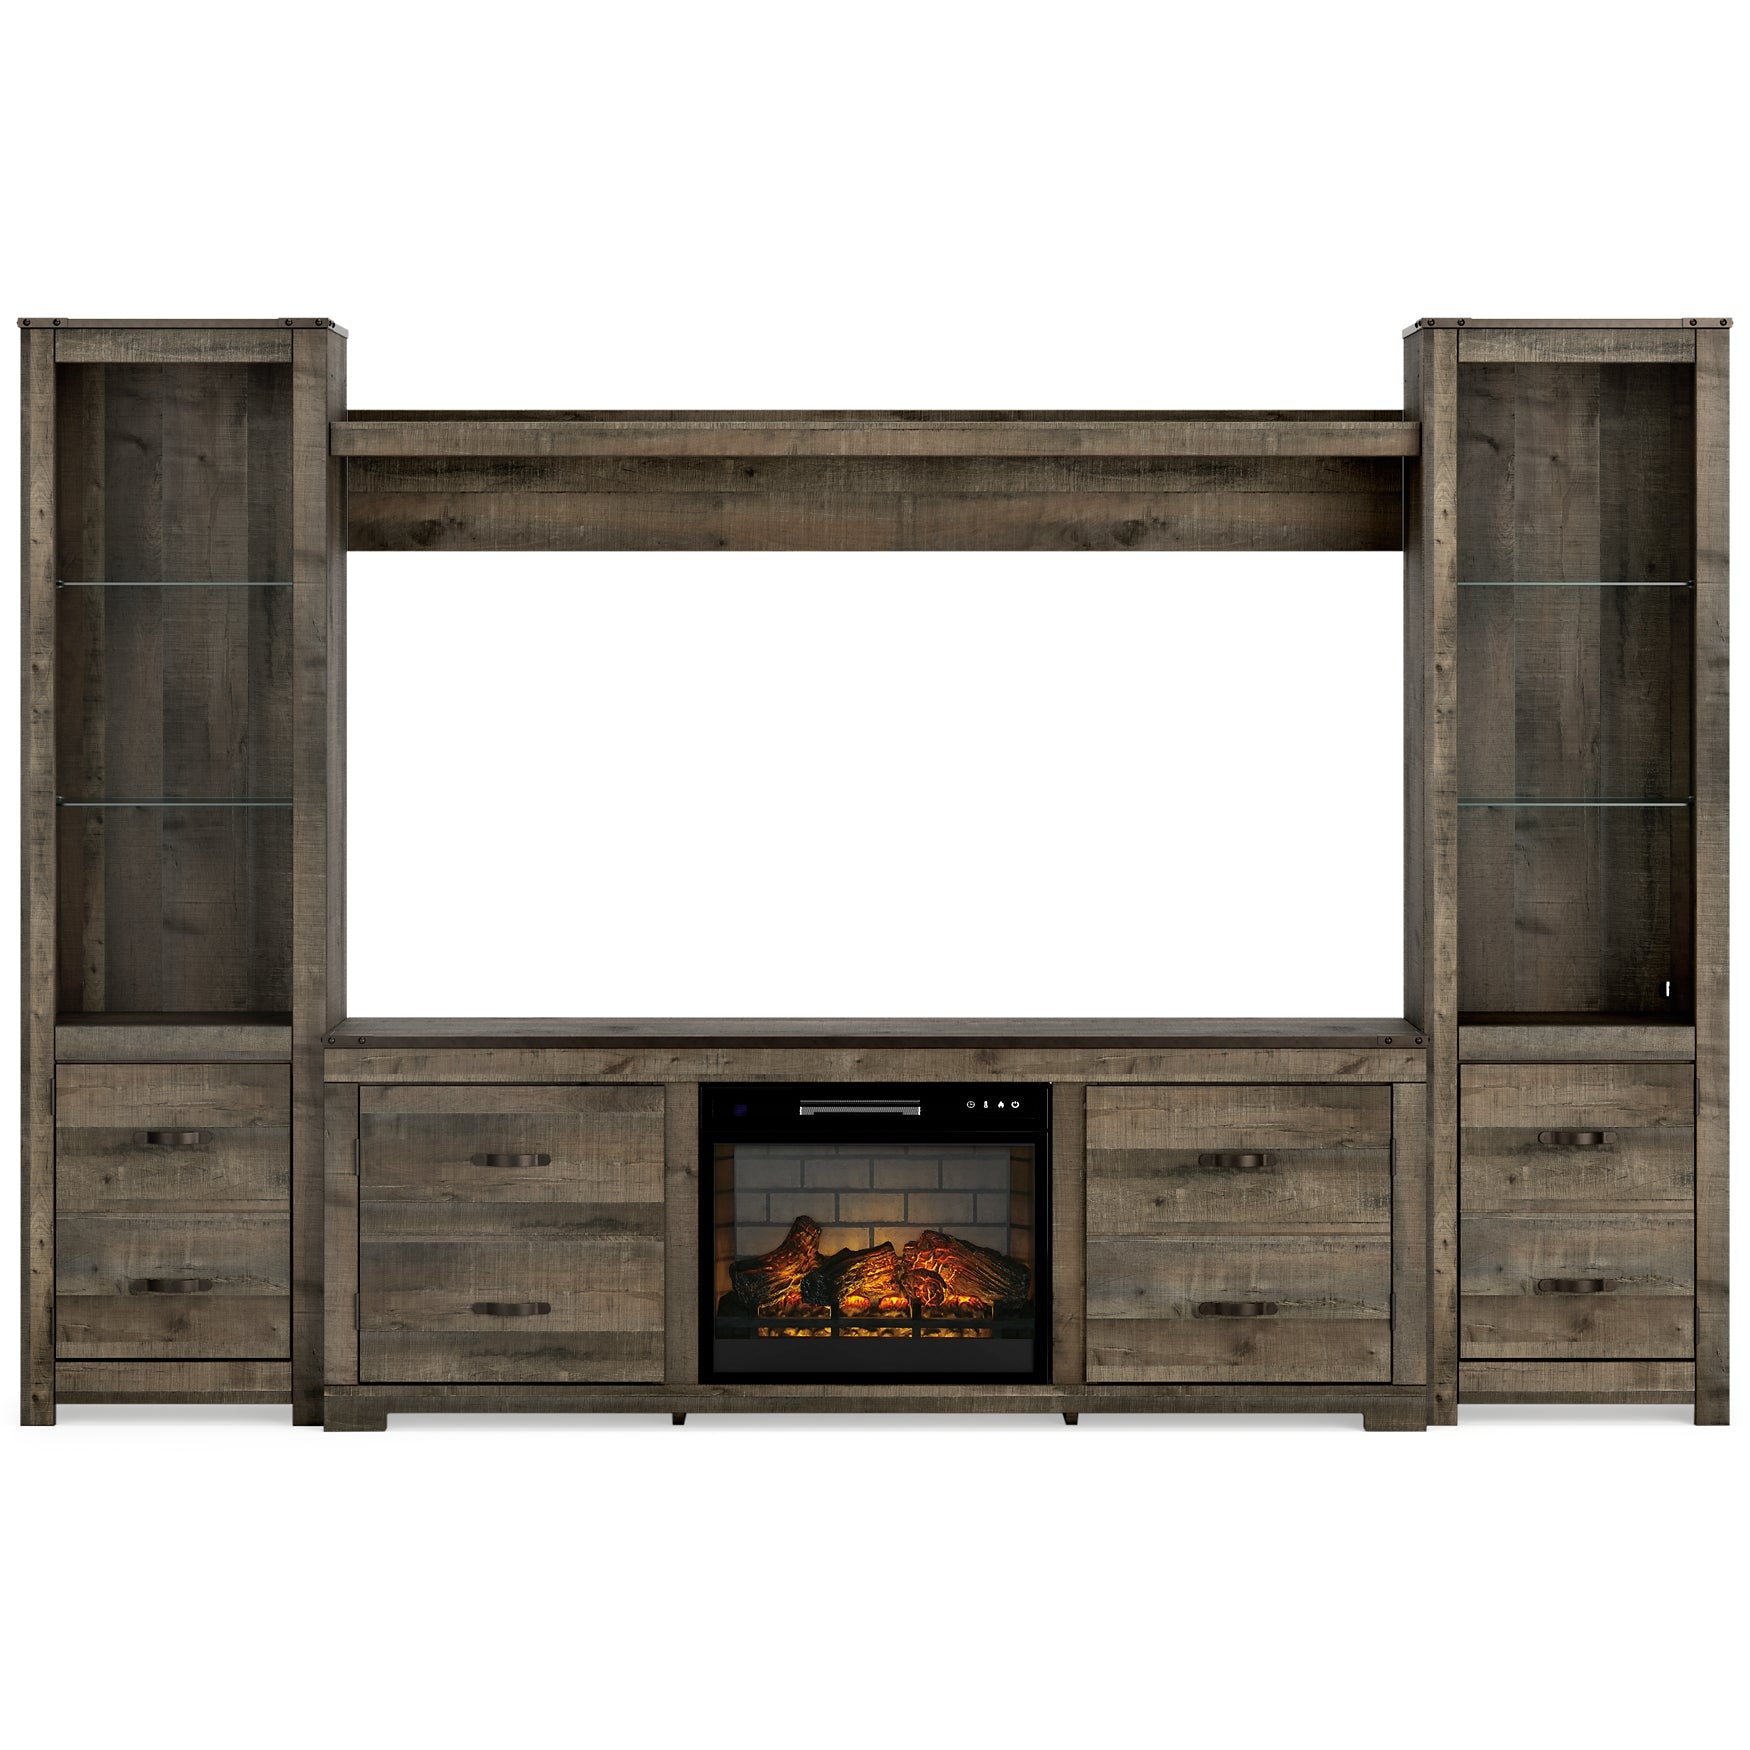 Ashley Express - Trinell 4-Piece Entertainment Center with Electric Fireplace Wilson Furniture (OH)  in Bridgeport, Ohio. Serving Bridgeport, Yorkville, Bellaire, & Avondale